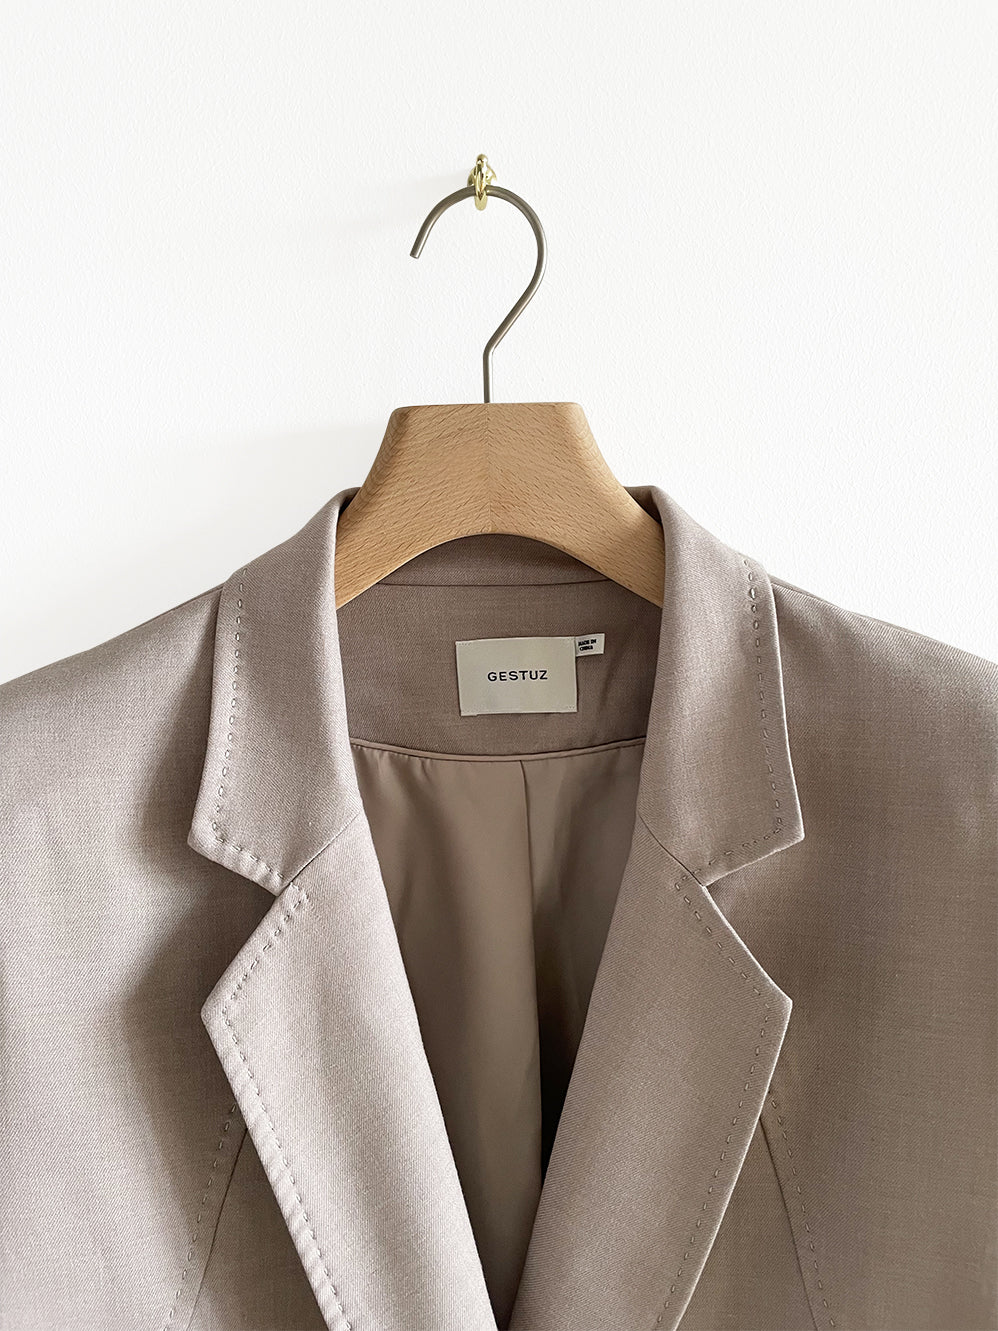 Tailored Grey/Beige Double Breasted Blazer